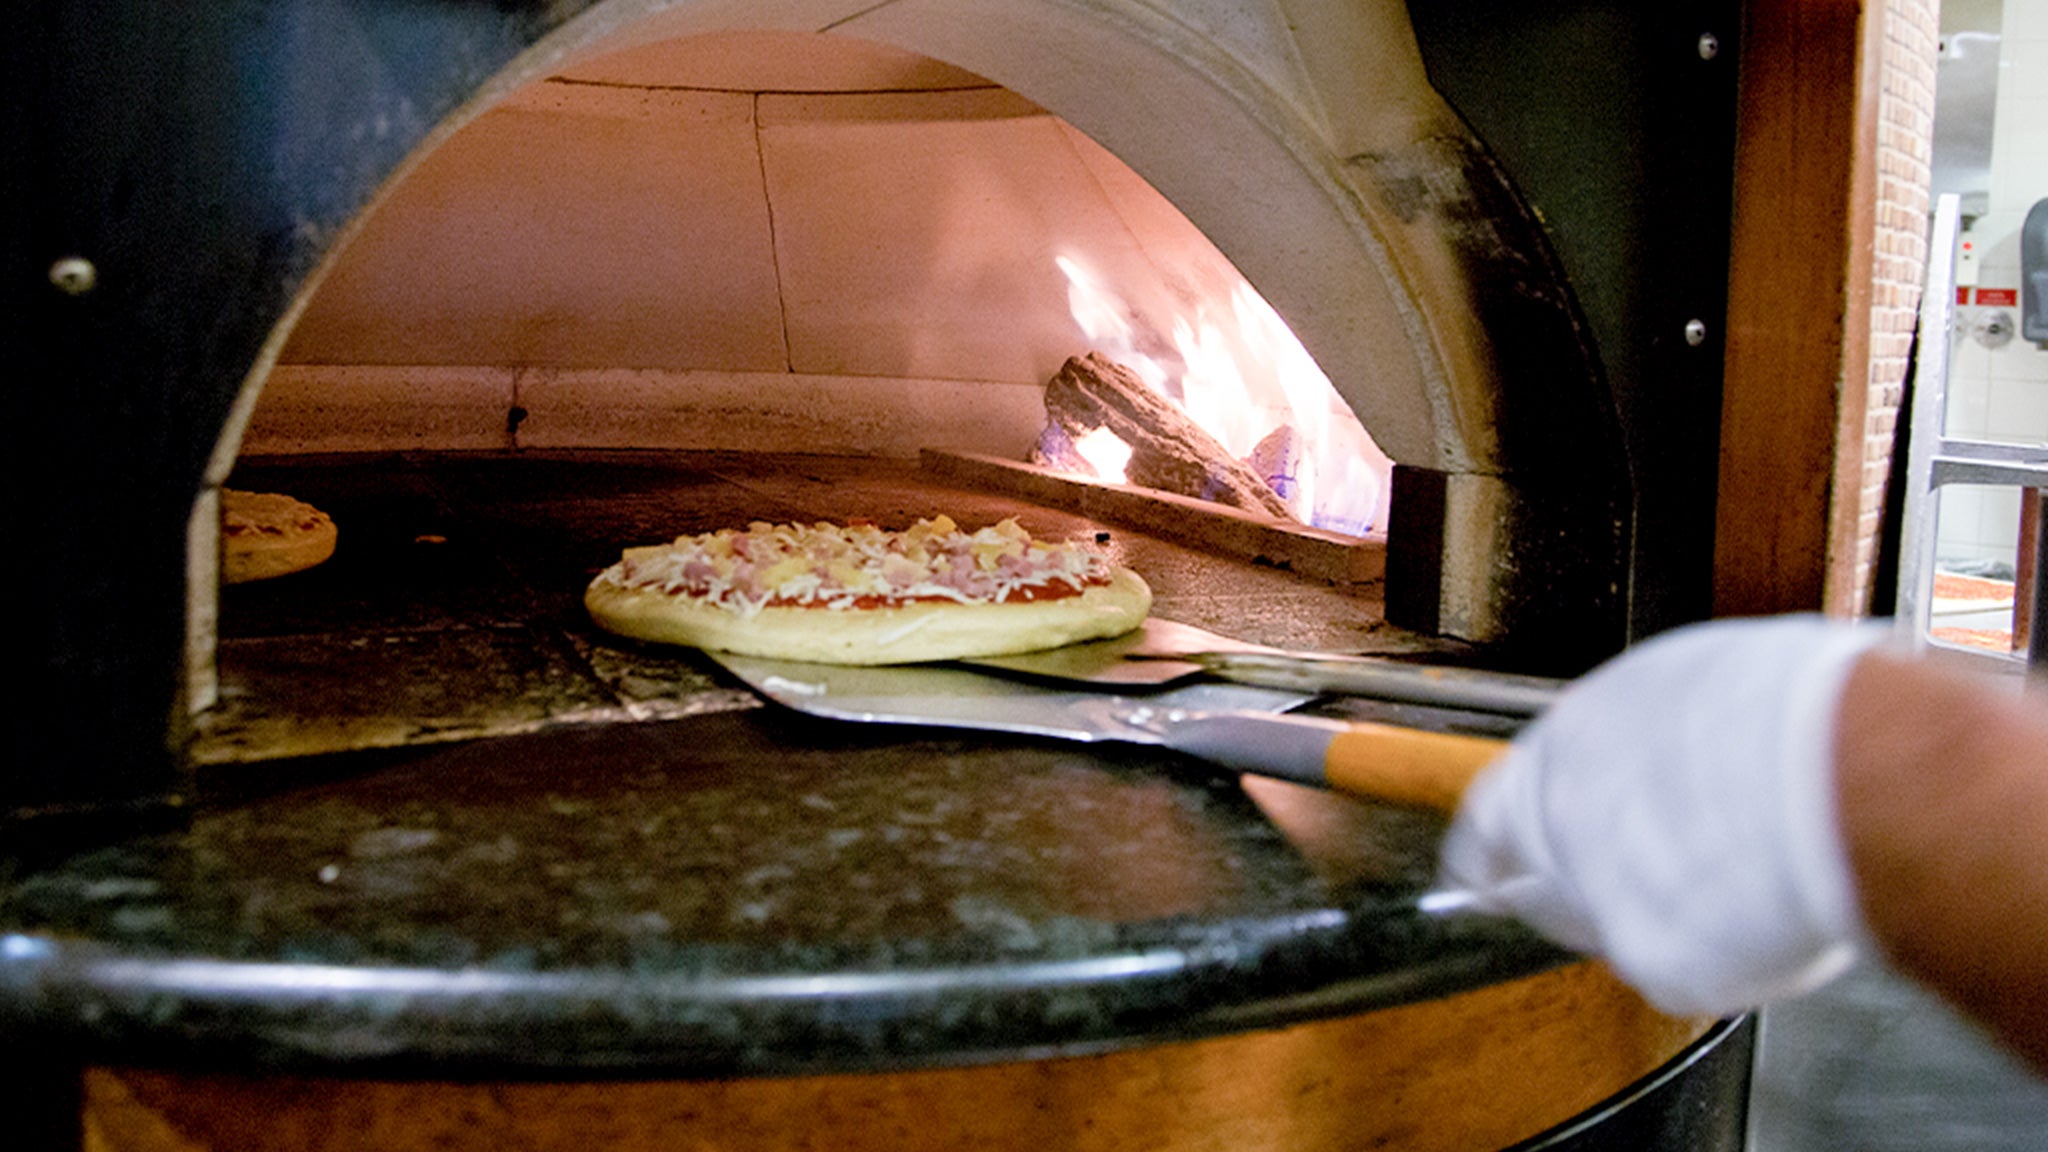 A chef slides a pizza close to the flame in the pizza oven.